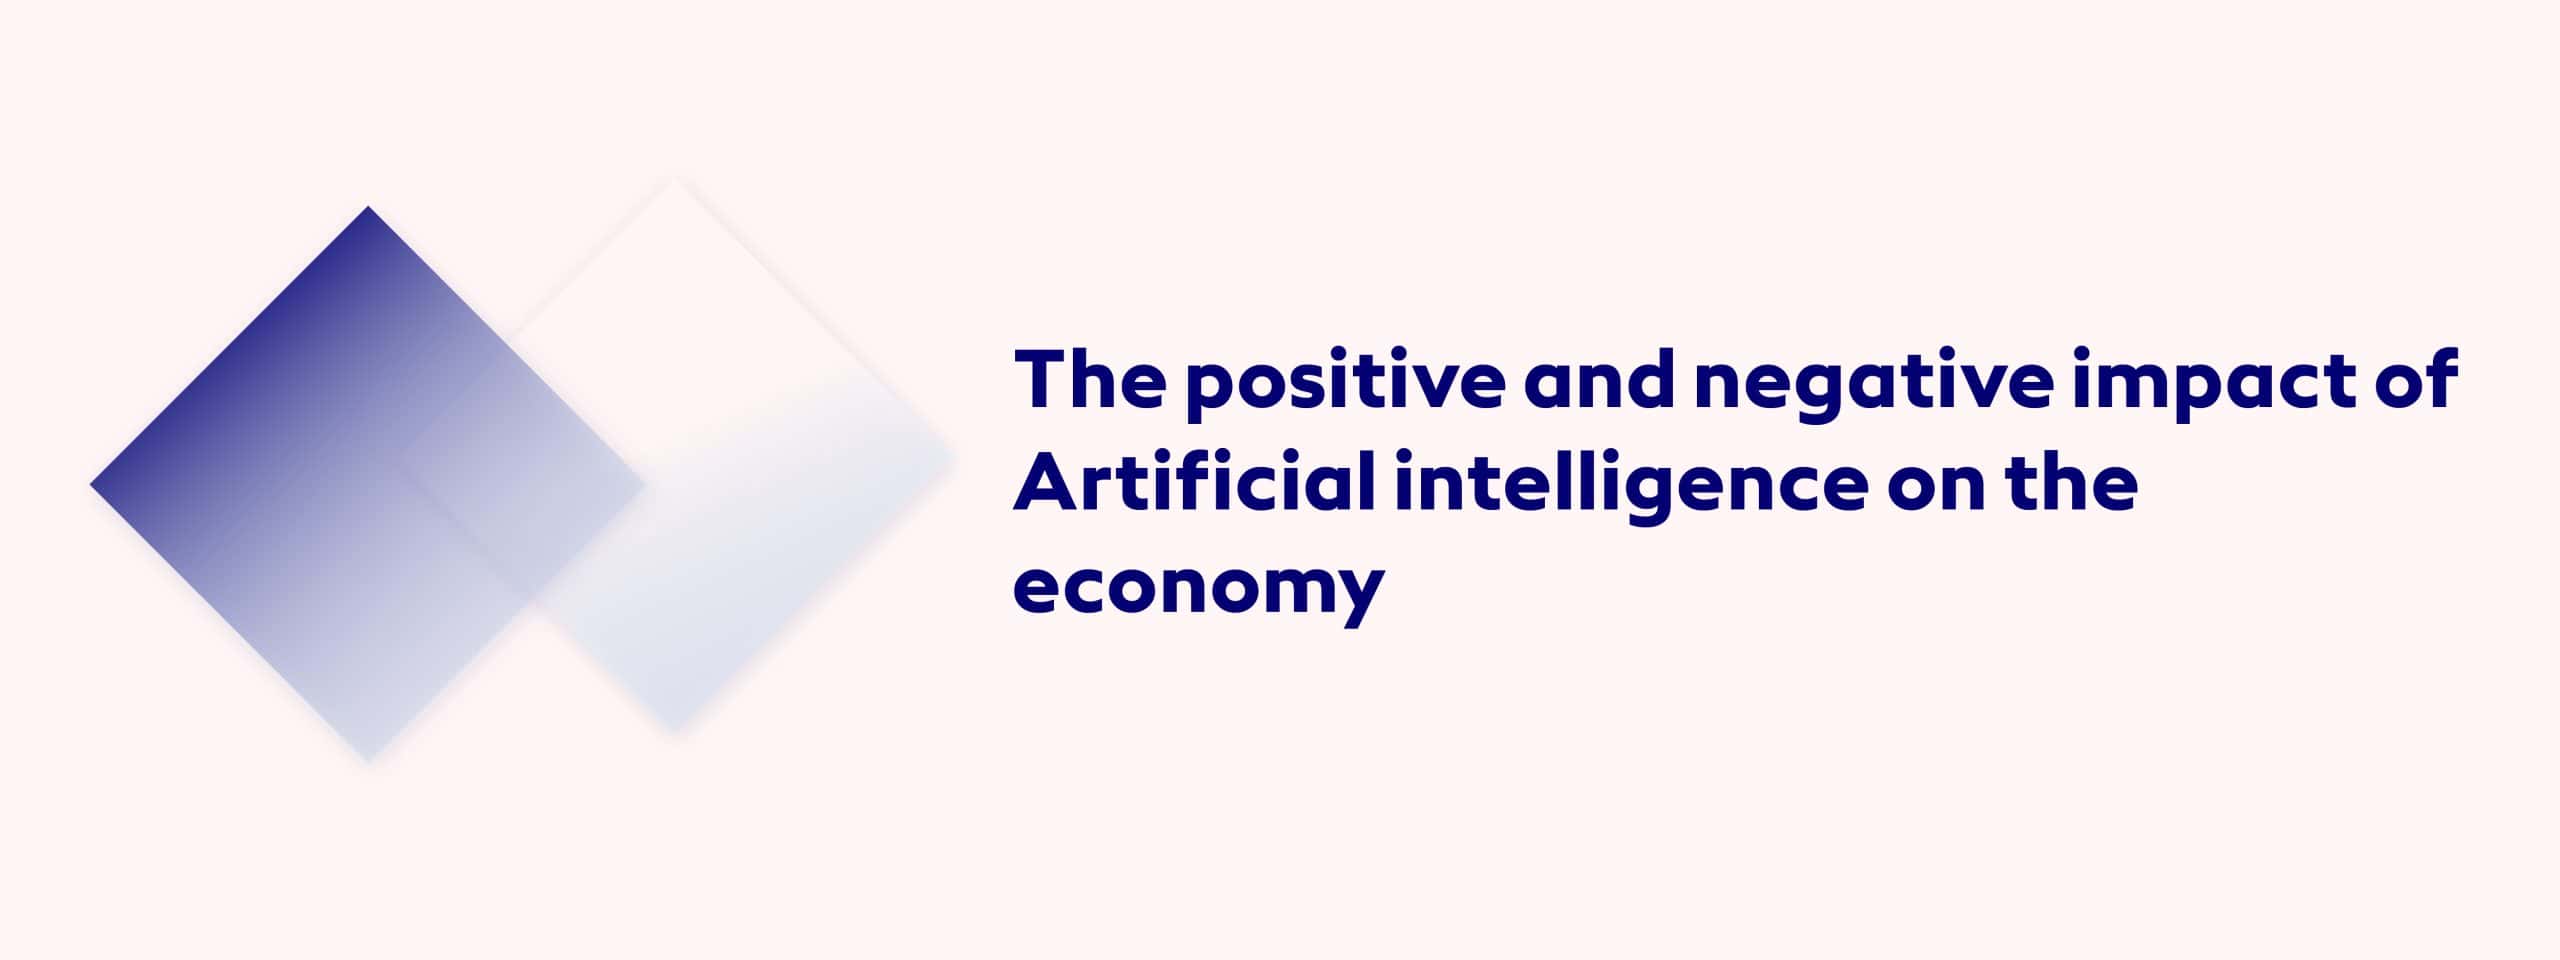 The positive and negative impact of Artificial intelligence on the economy​